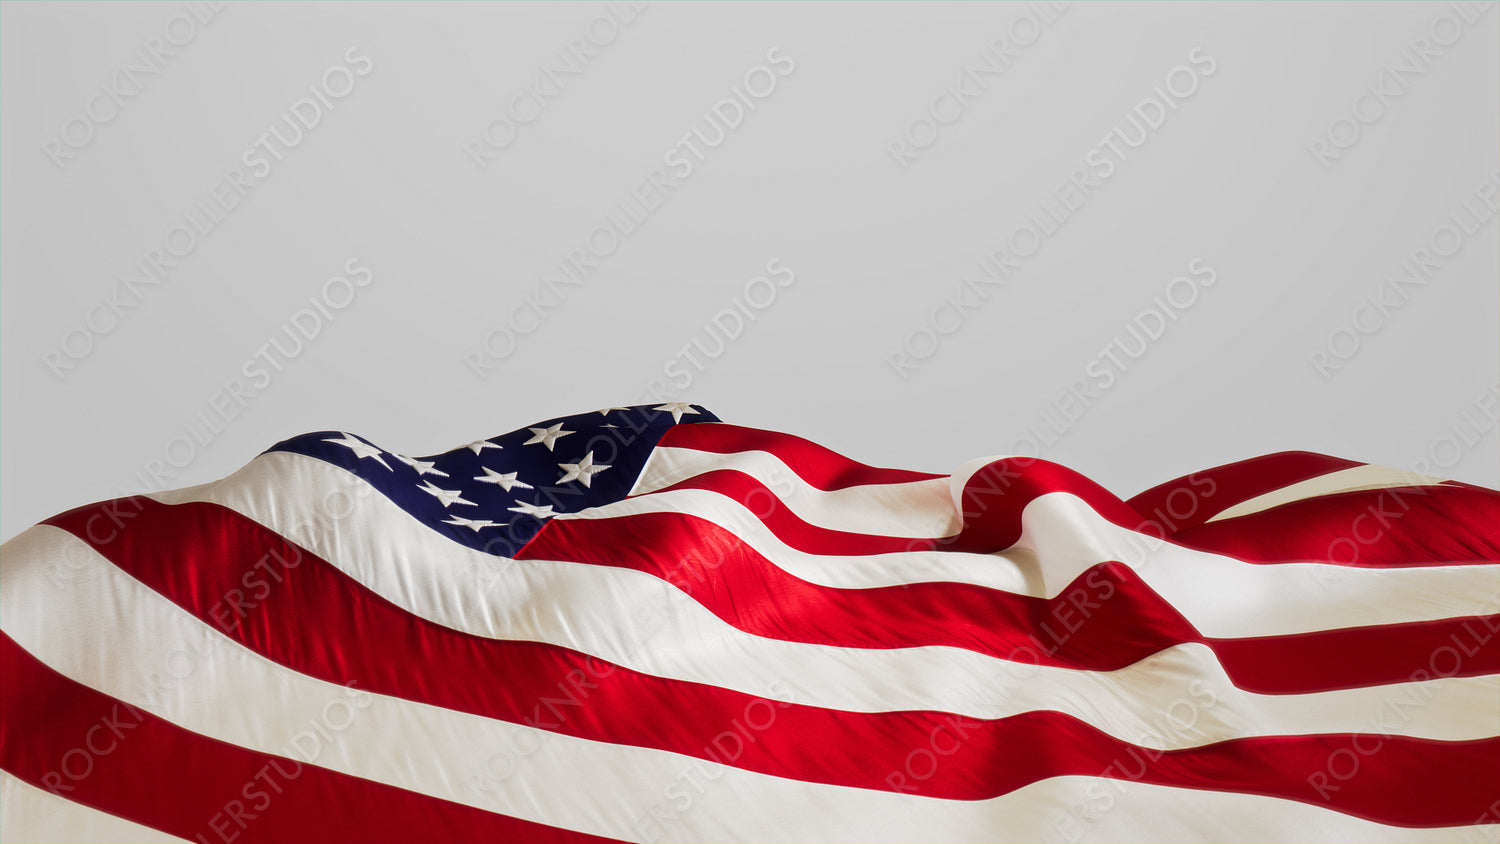 Presidents day Banner with American Flag, Isolated on White Background with Copy-Space.